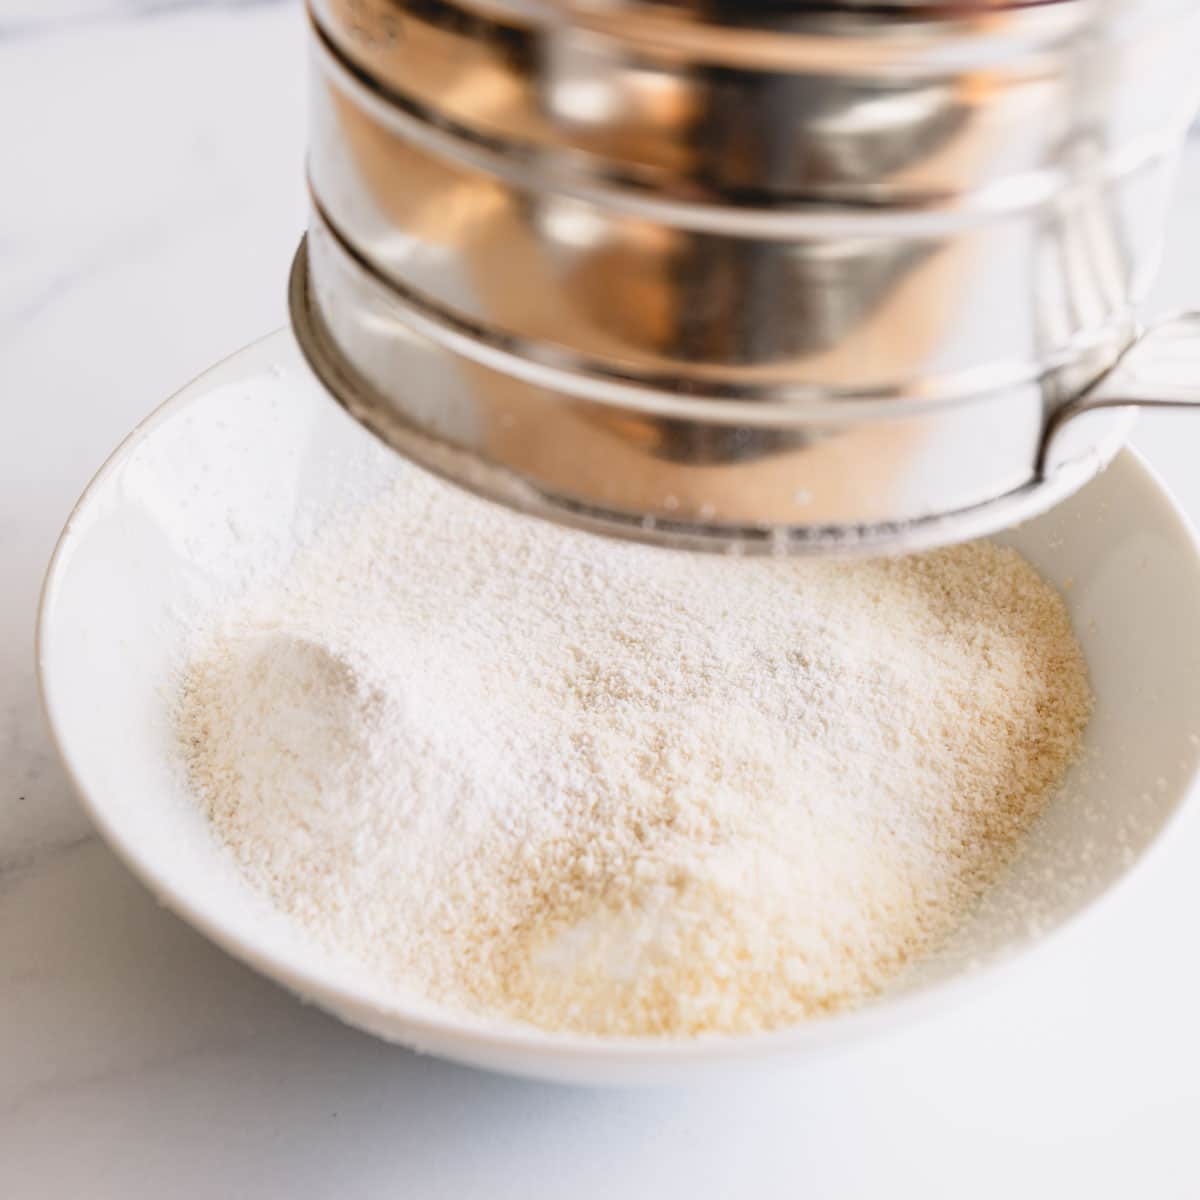 Almond flour and powdered sugar being sifted into a white bowl.